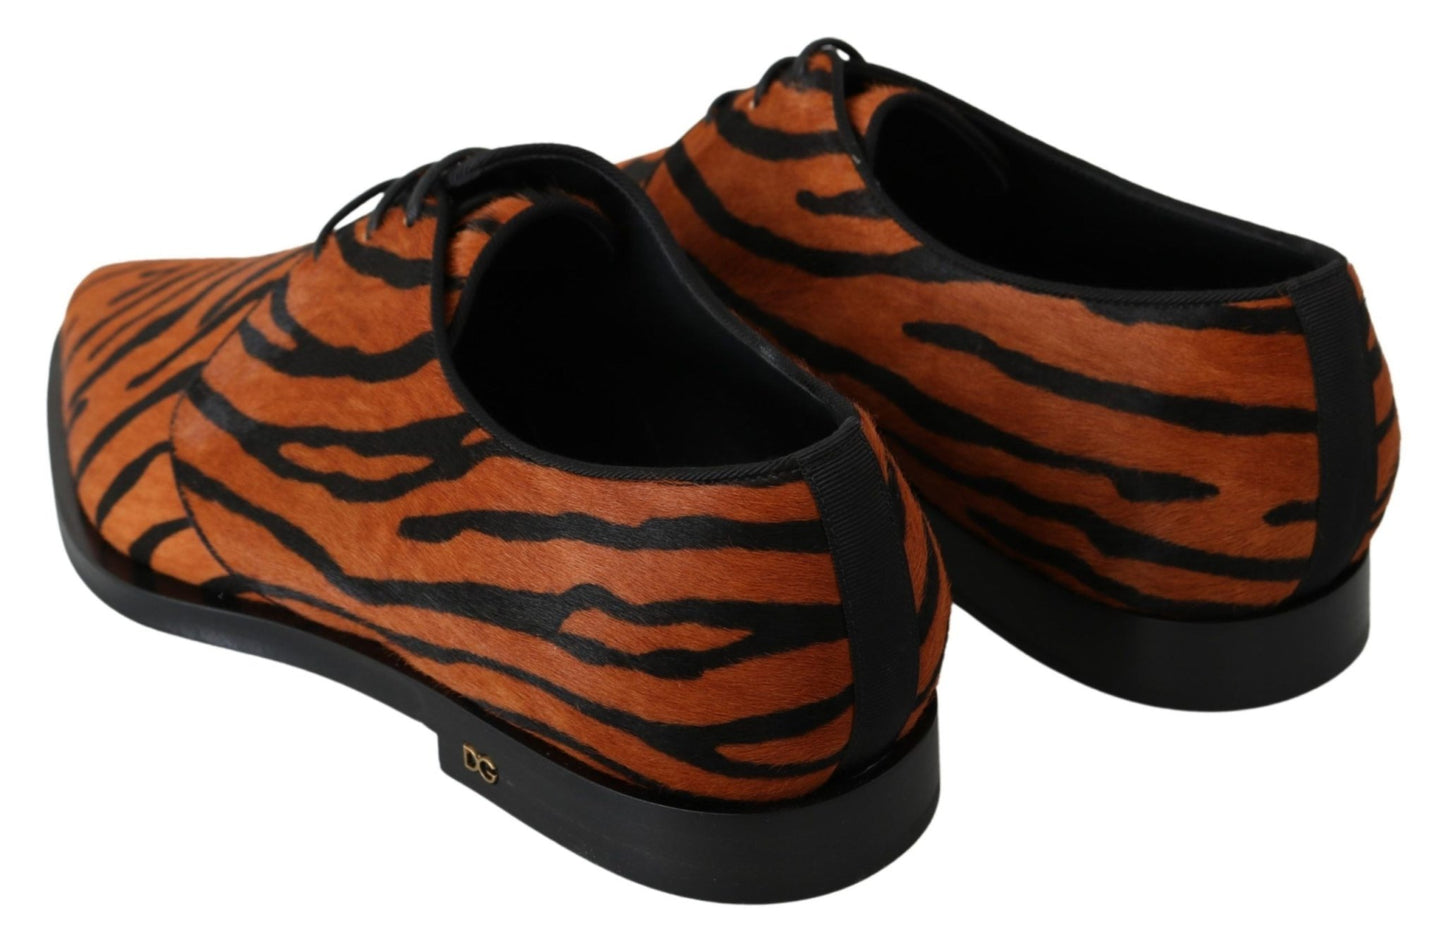 Dolce & Gabbana Tiger Pattern Dress Shoes with Pony Hair